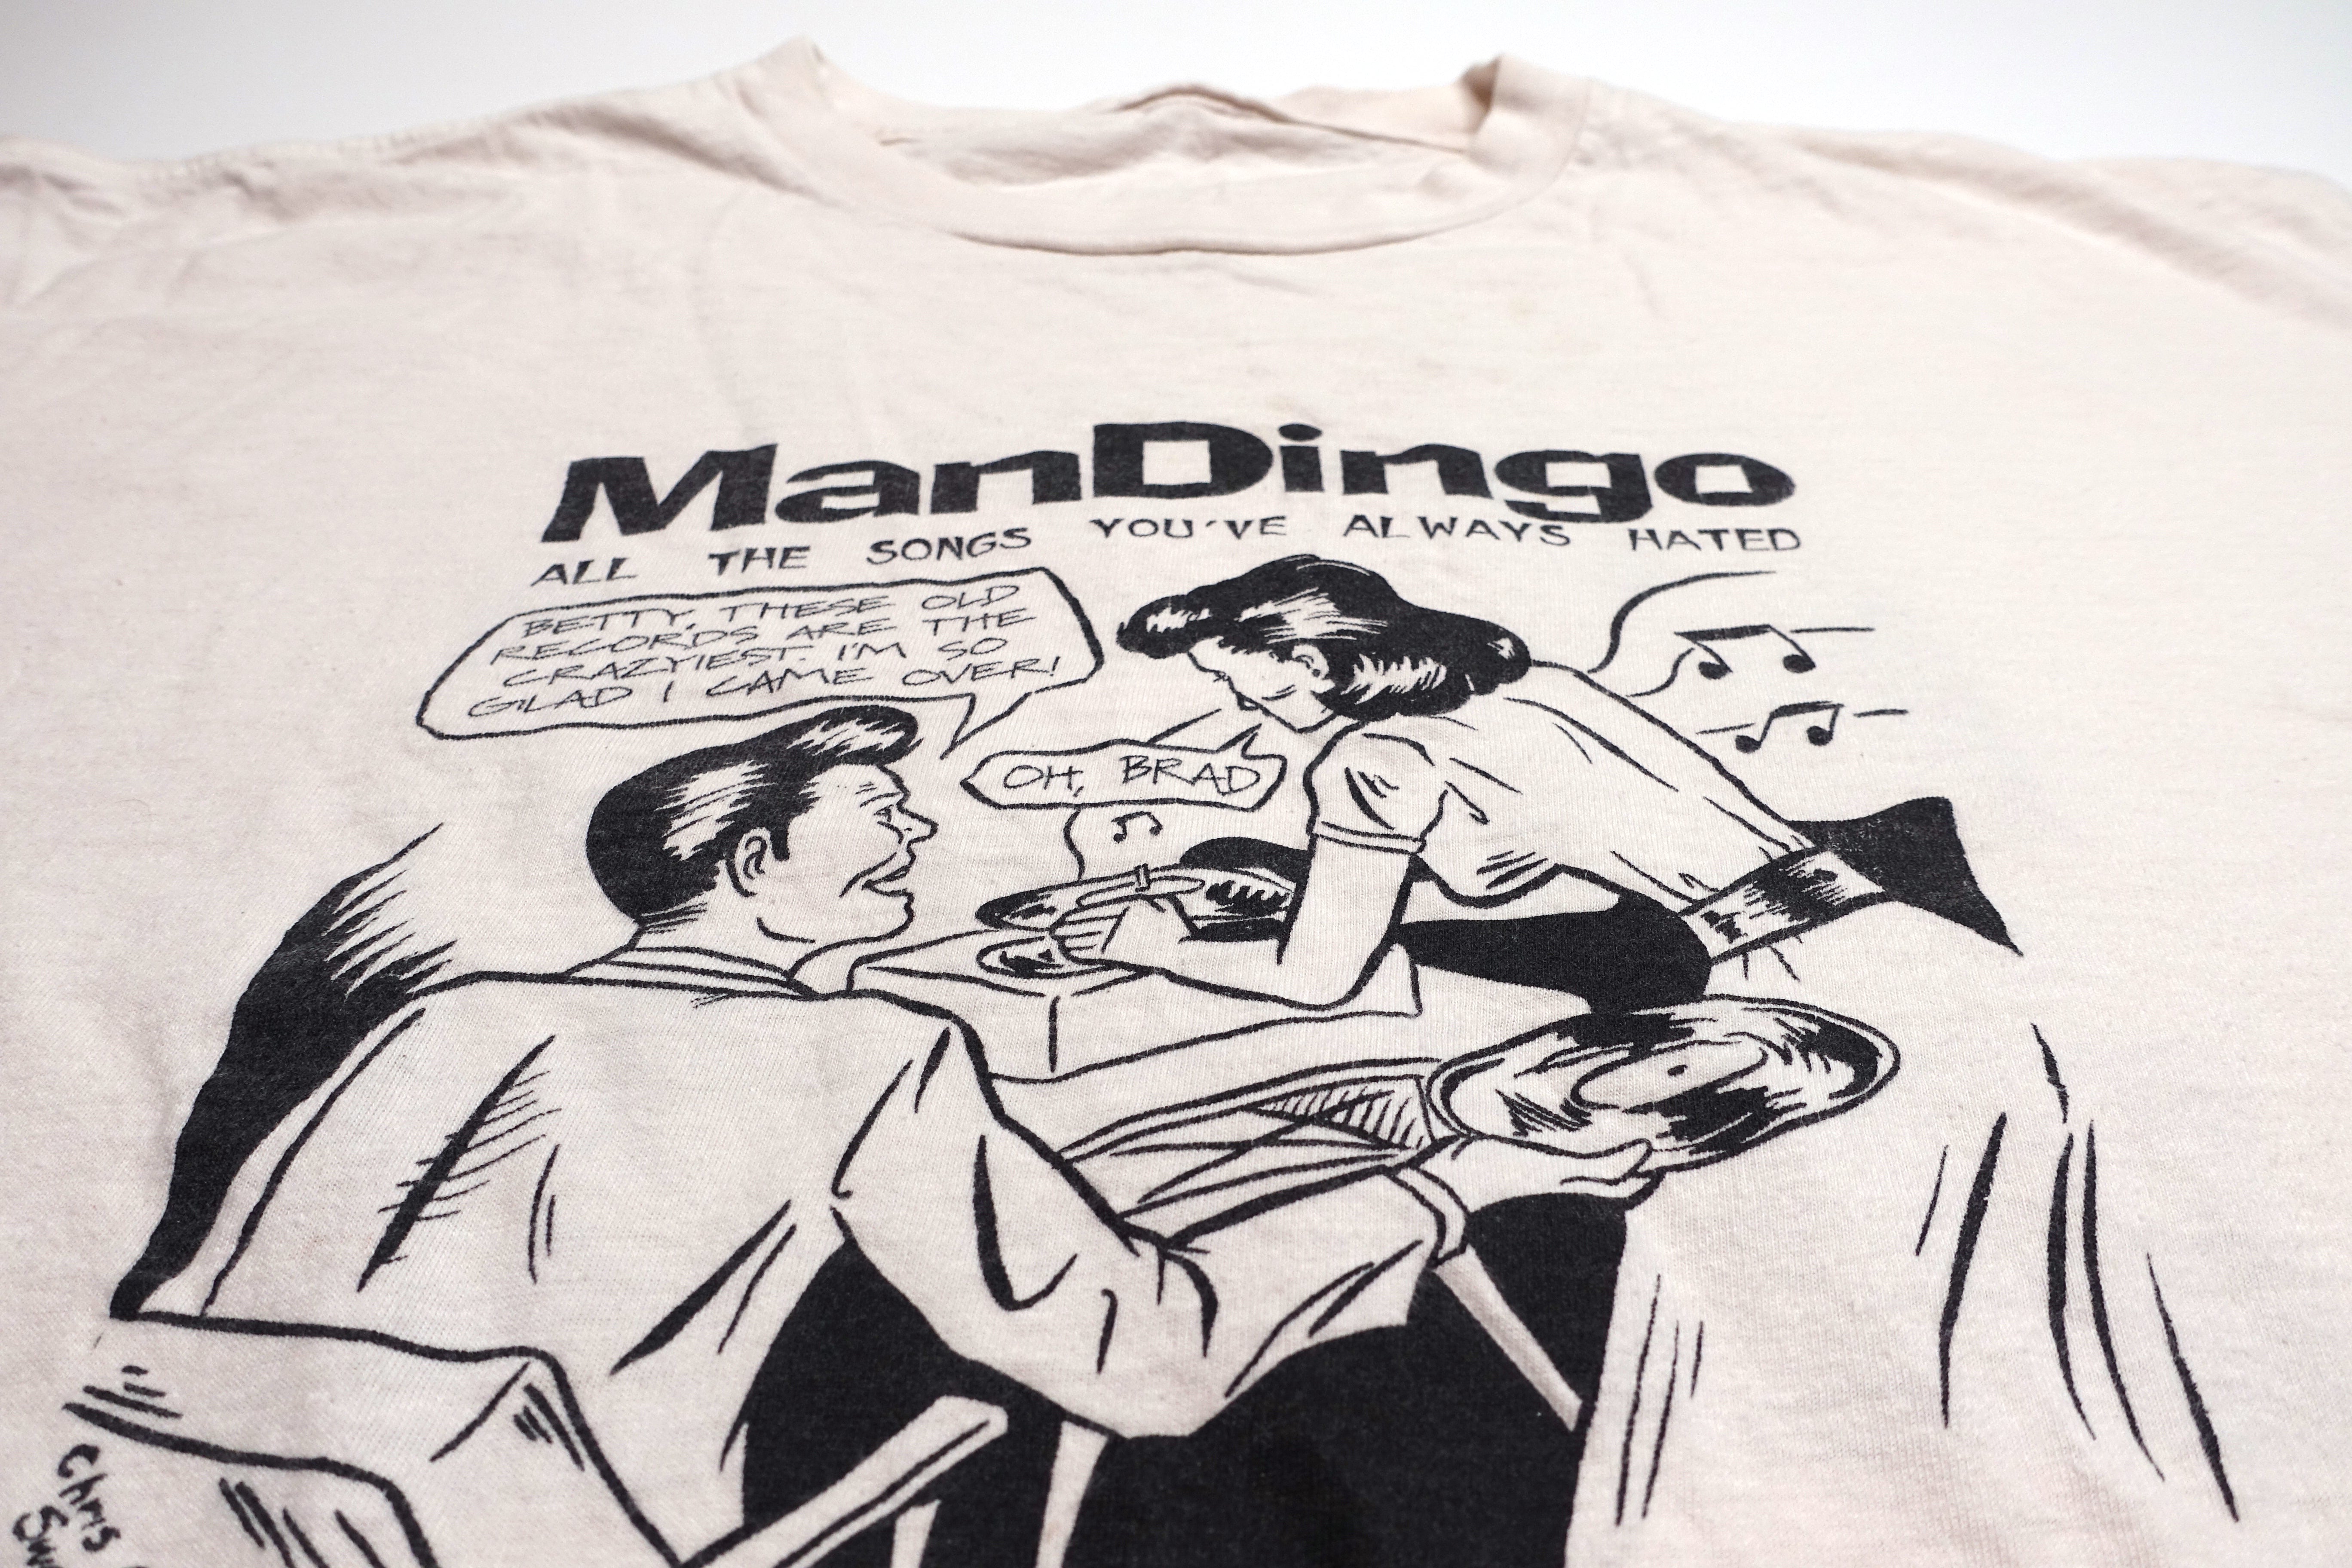 Man Dingo - All The Songs You've Always Hated 1995 Tour Shirt Size XL